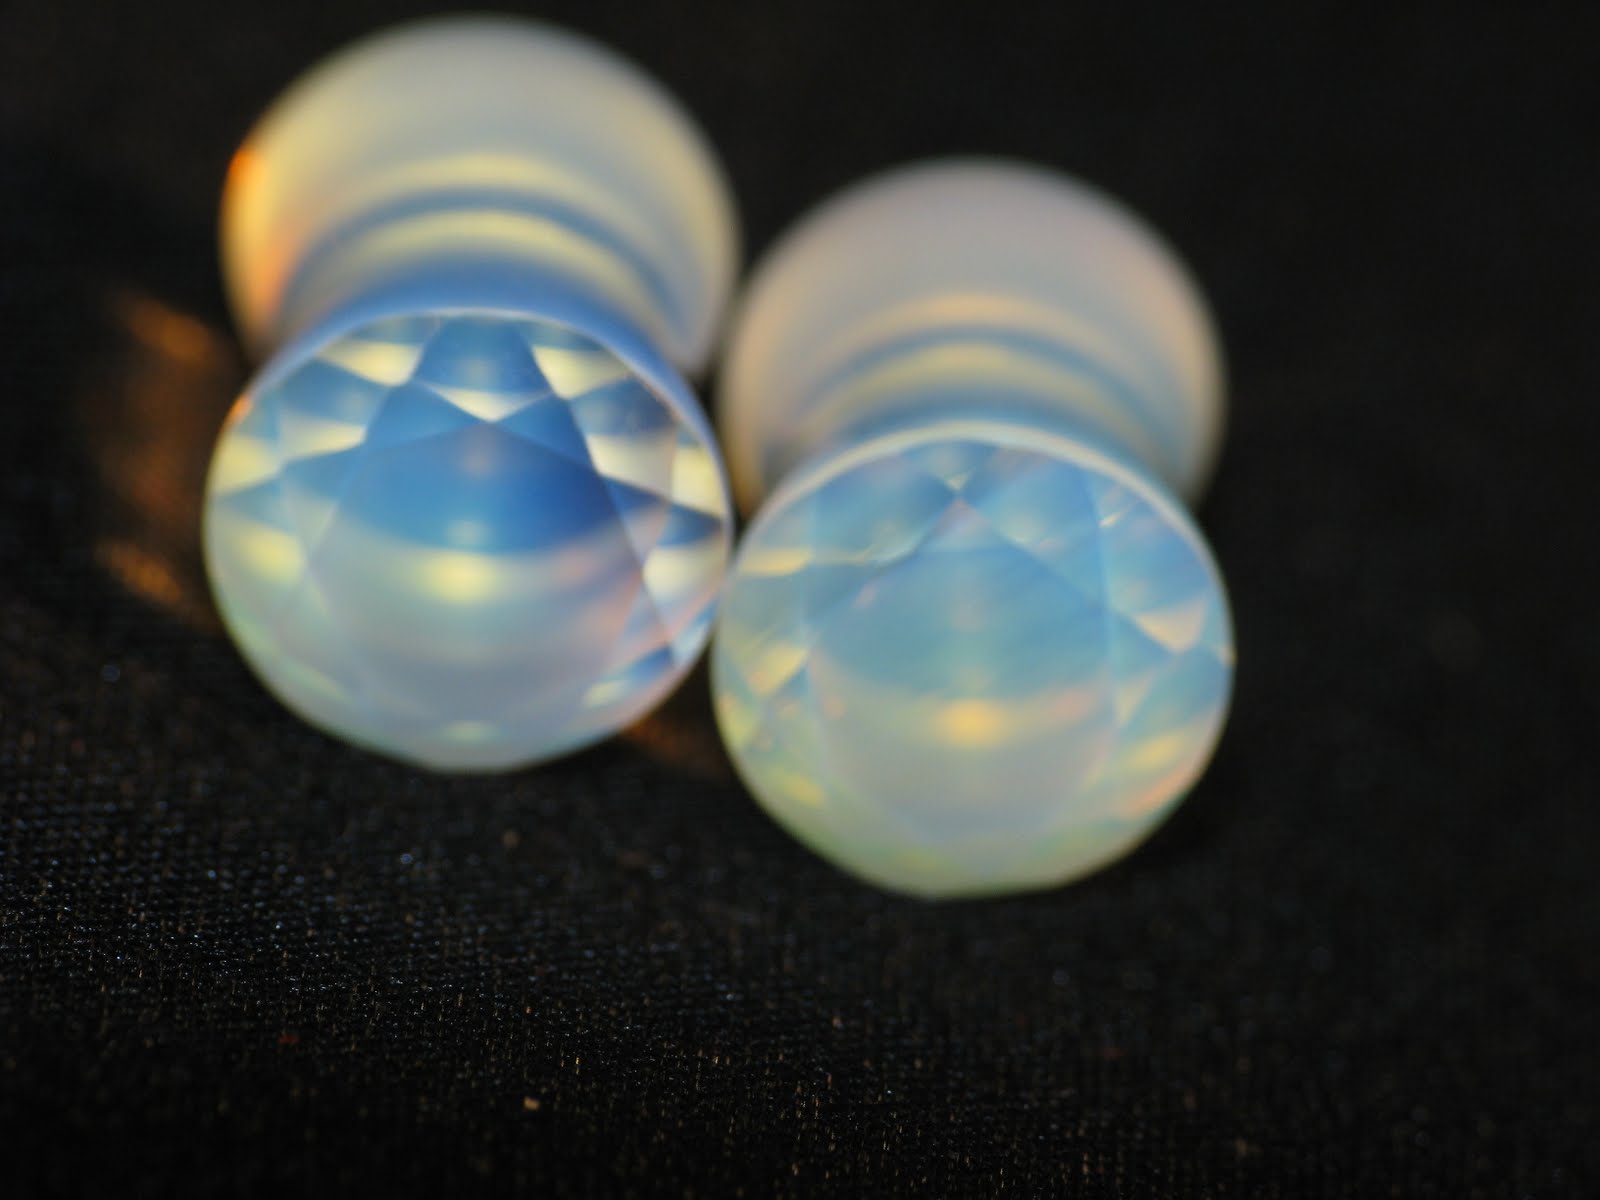 Avaia Artistic Body Jewelry: Faceted opalite plugs